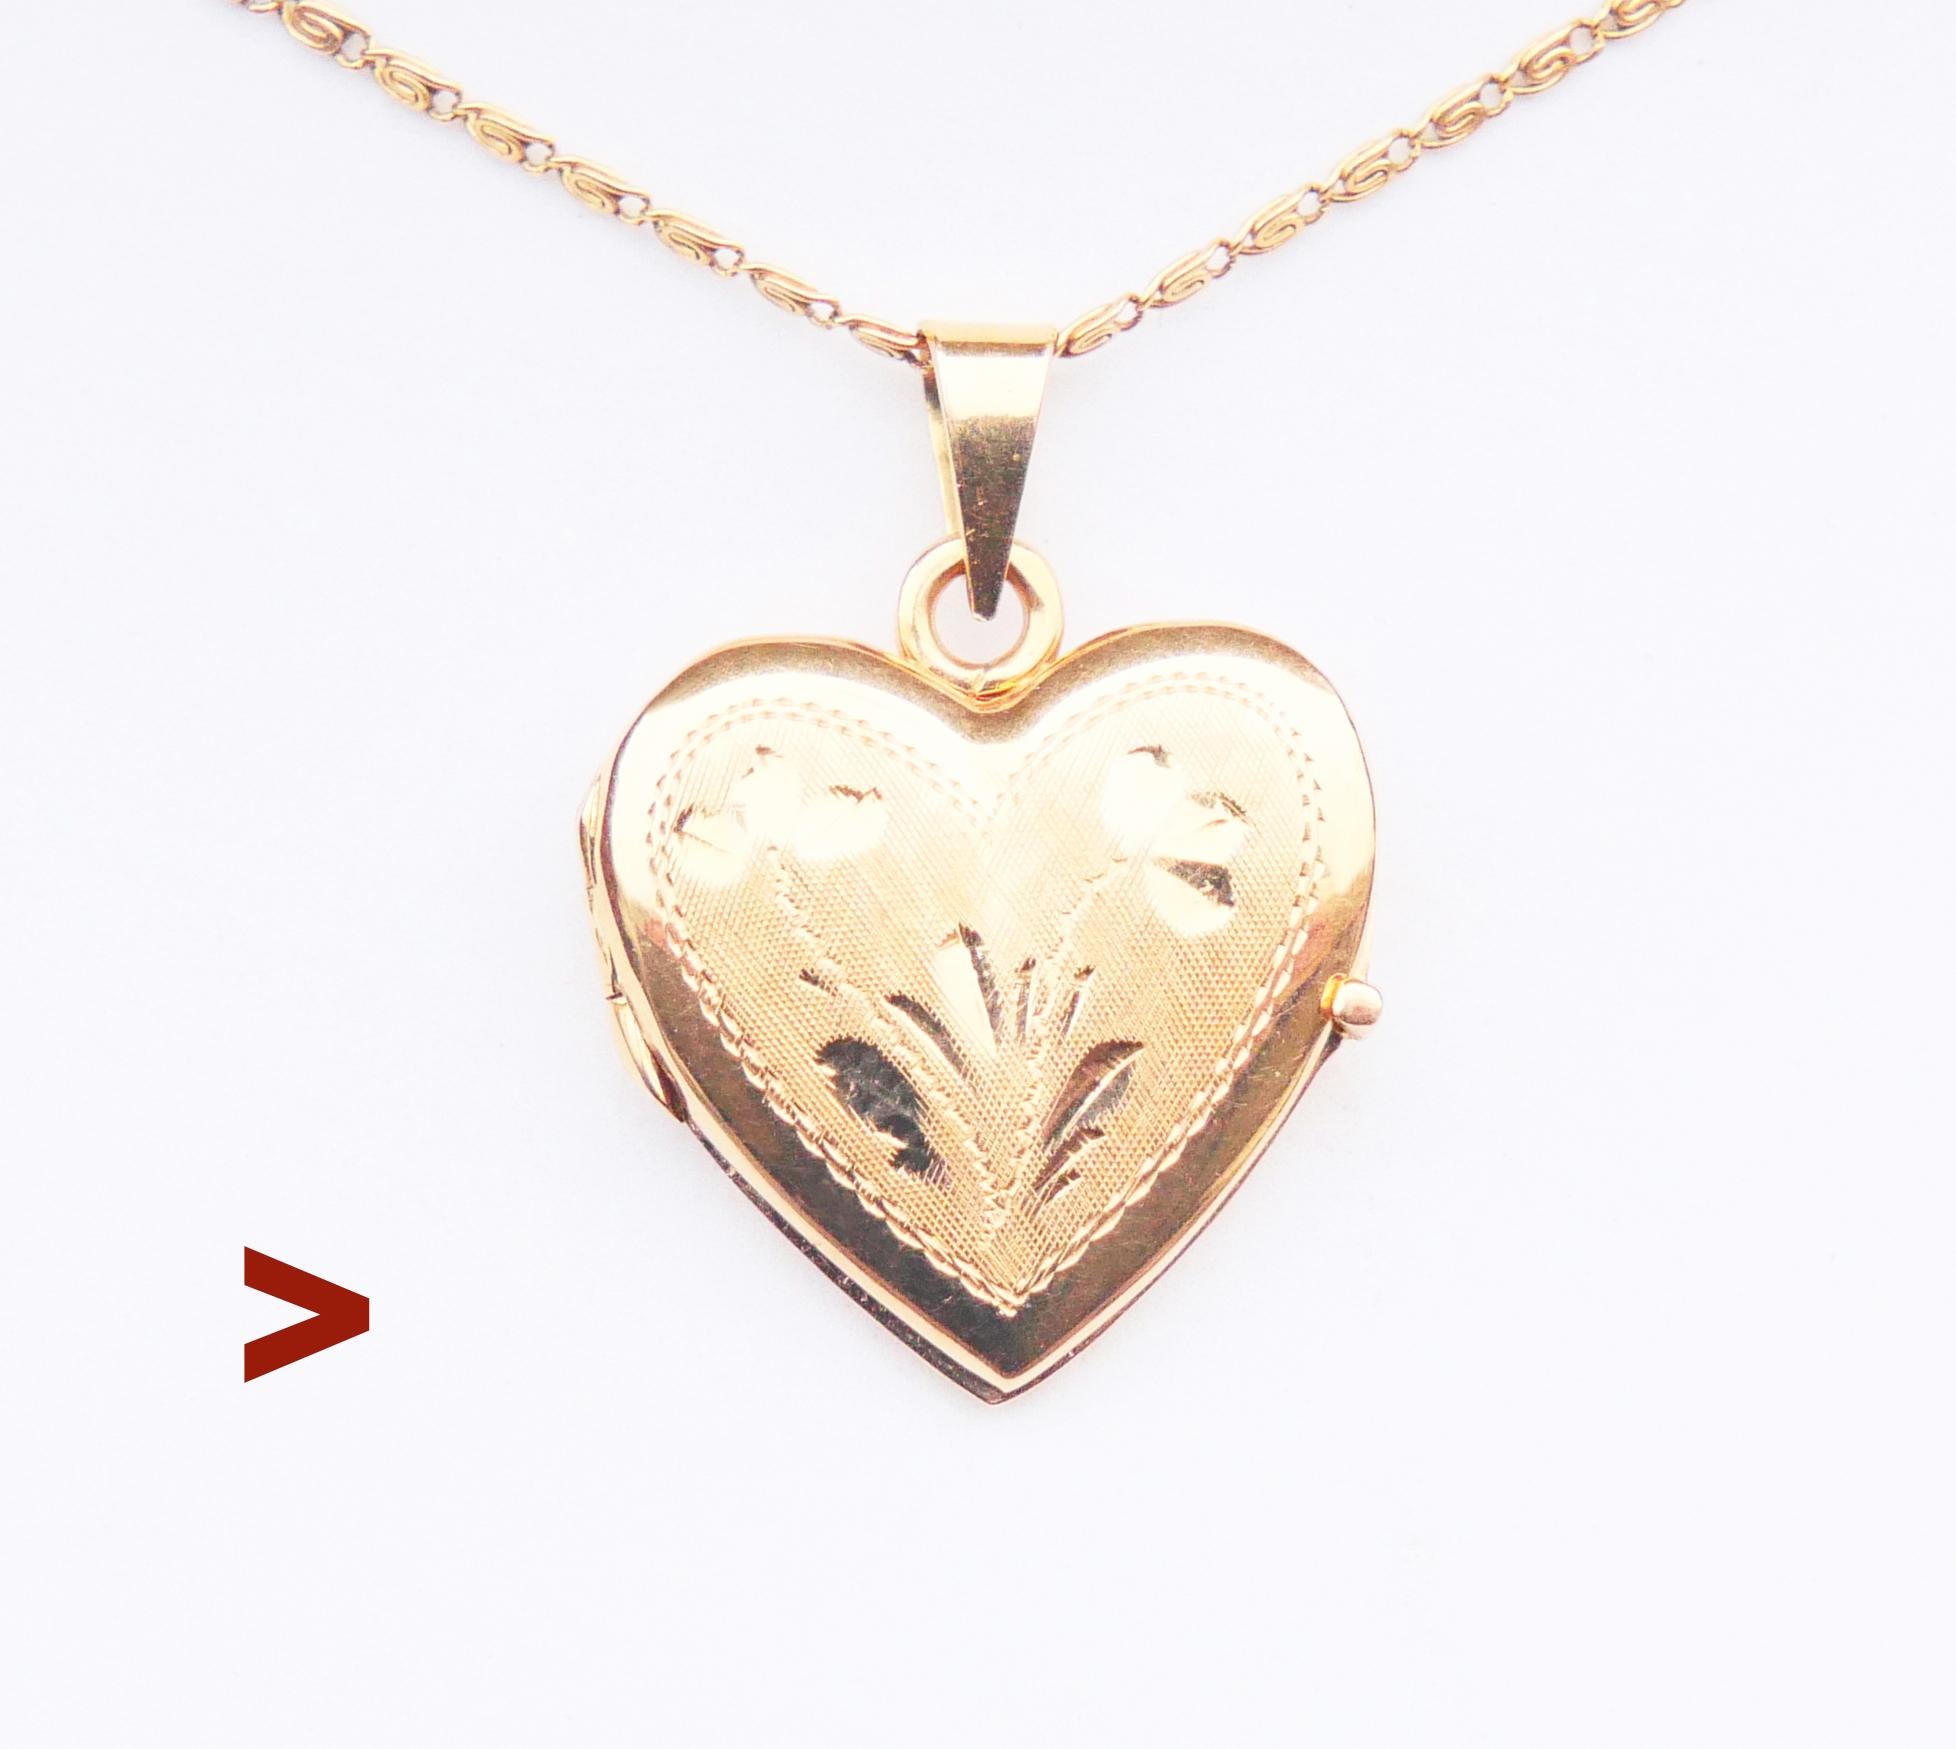 Pendant / Locket made of solid 18K Yellow Gold with floral hand - engraving on the frontal side. Two hinged sections with removable bezels for your photographs. The halves open and close tightly . Distinctive concave nail-catchers on both